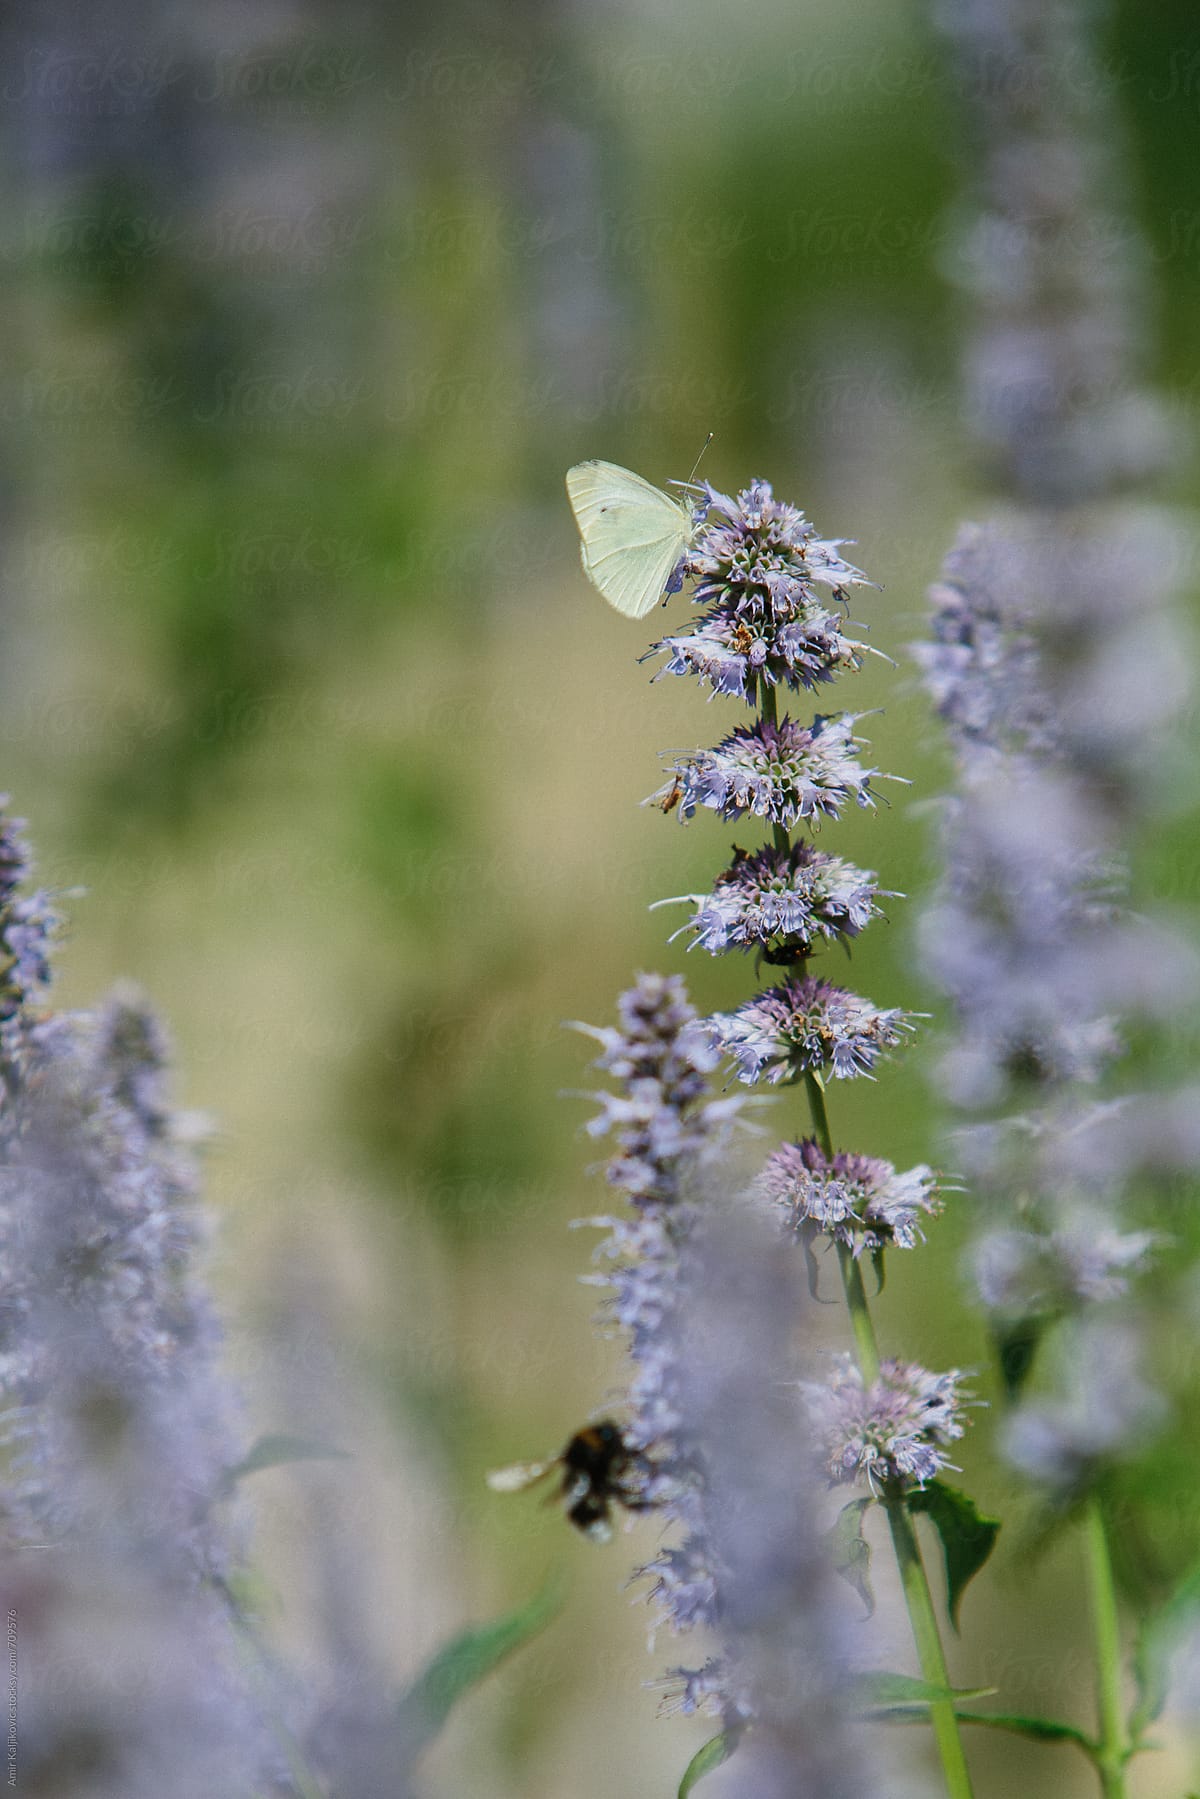 Small Butterfly on Lavender Flower at the Garden